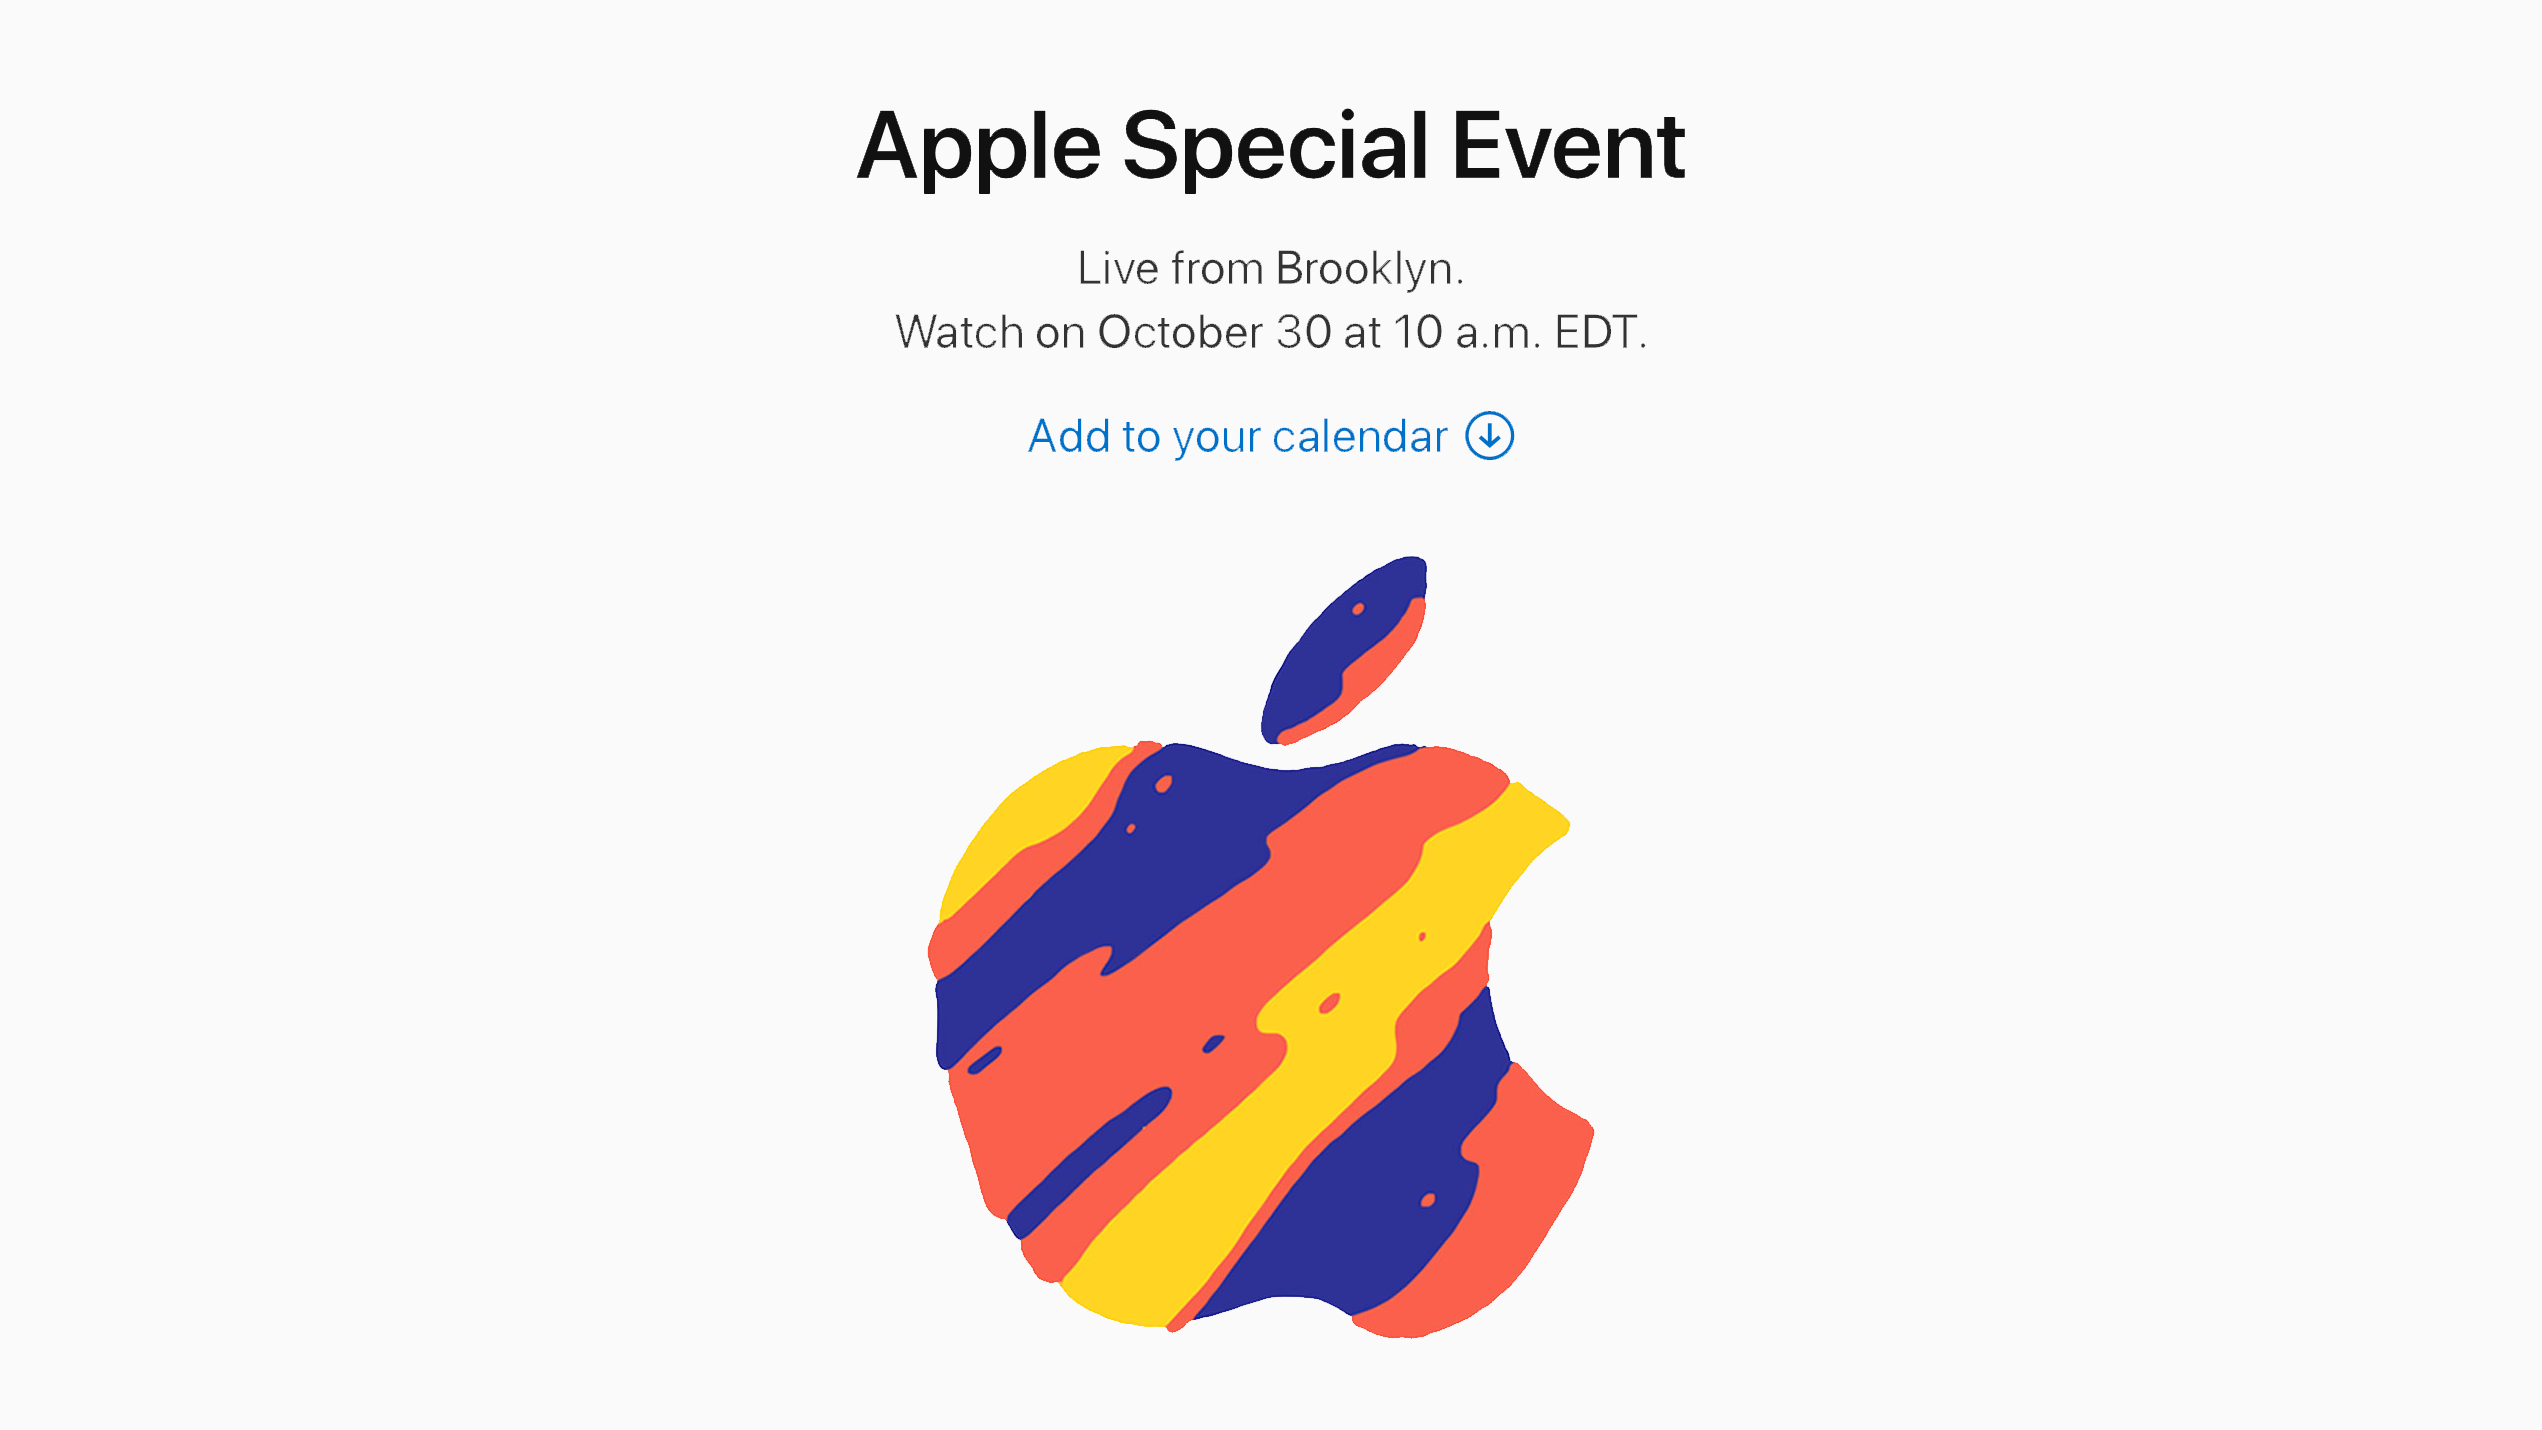 Apple Special Event. October 30, 2018.